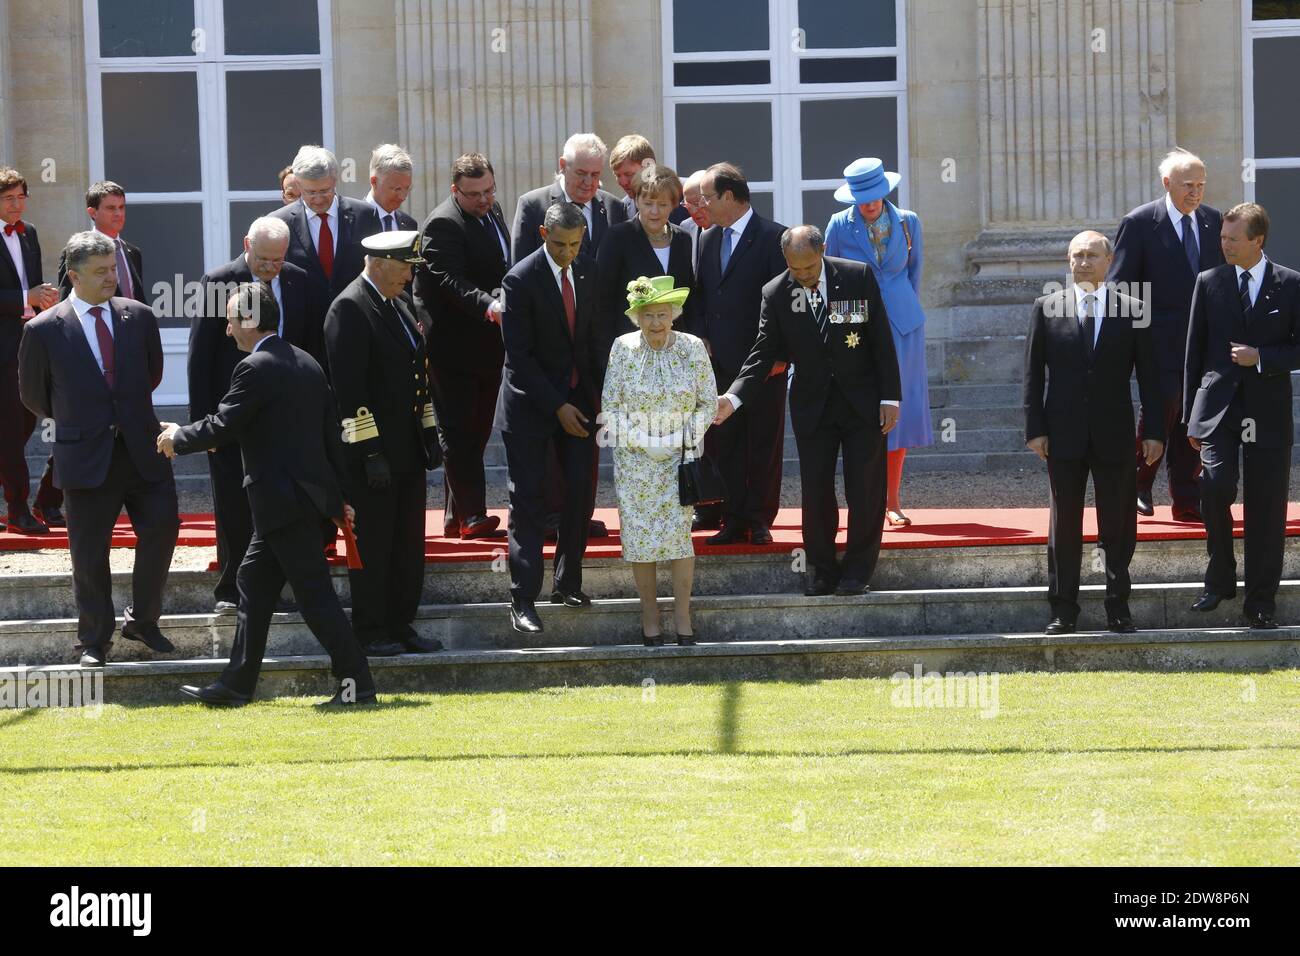 US President Barack Obama participates in a group photo of world leaders attending the D-Day 70th Anniversary ceremonies at Chateau de Benouville in Benouville, France, June 6, 2014. The D-Day ceremonies mark the 70th anniversary of the launching of 'Operation Overlord', a vast military operation by Allied forces in Normandy, which turned the tide of World War II, eventually leading to the liberation of occupied France and the end of the war against Nazi Germany. Photo by Denis Allard/Pool/ABACAPRESS.COM Stock Photo